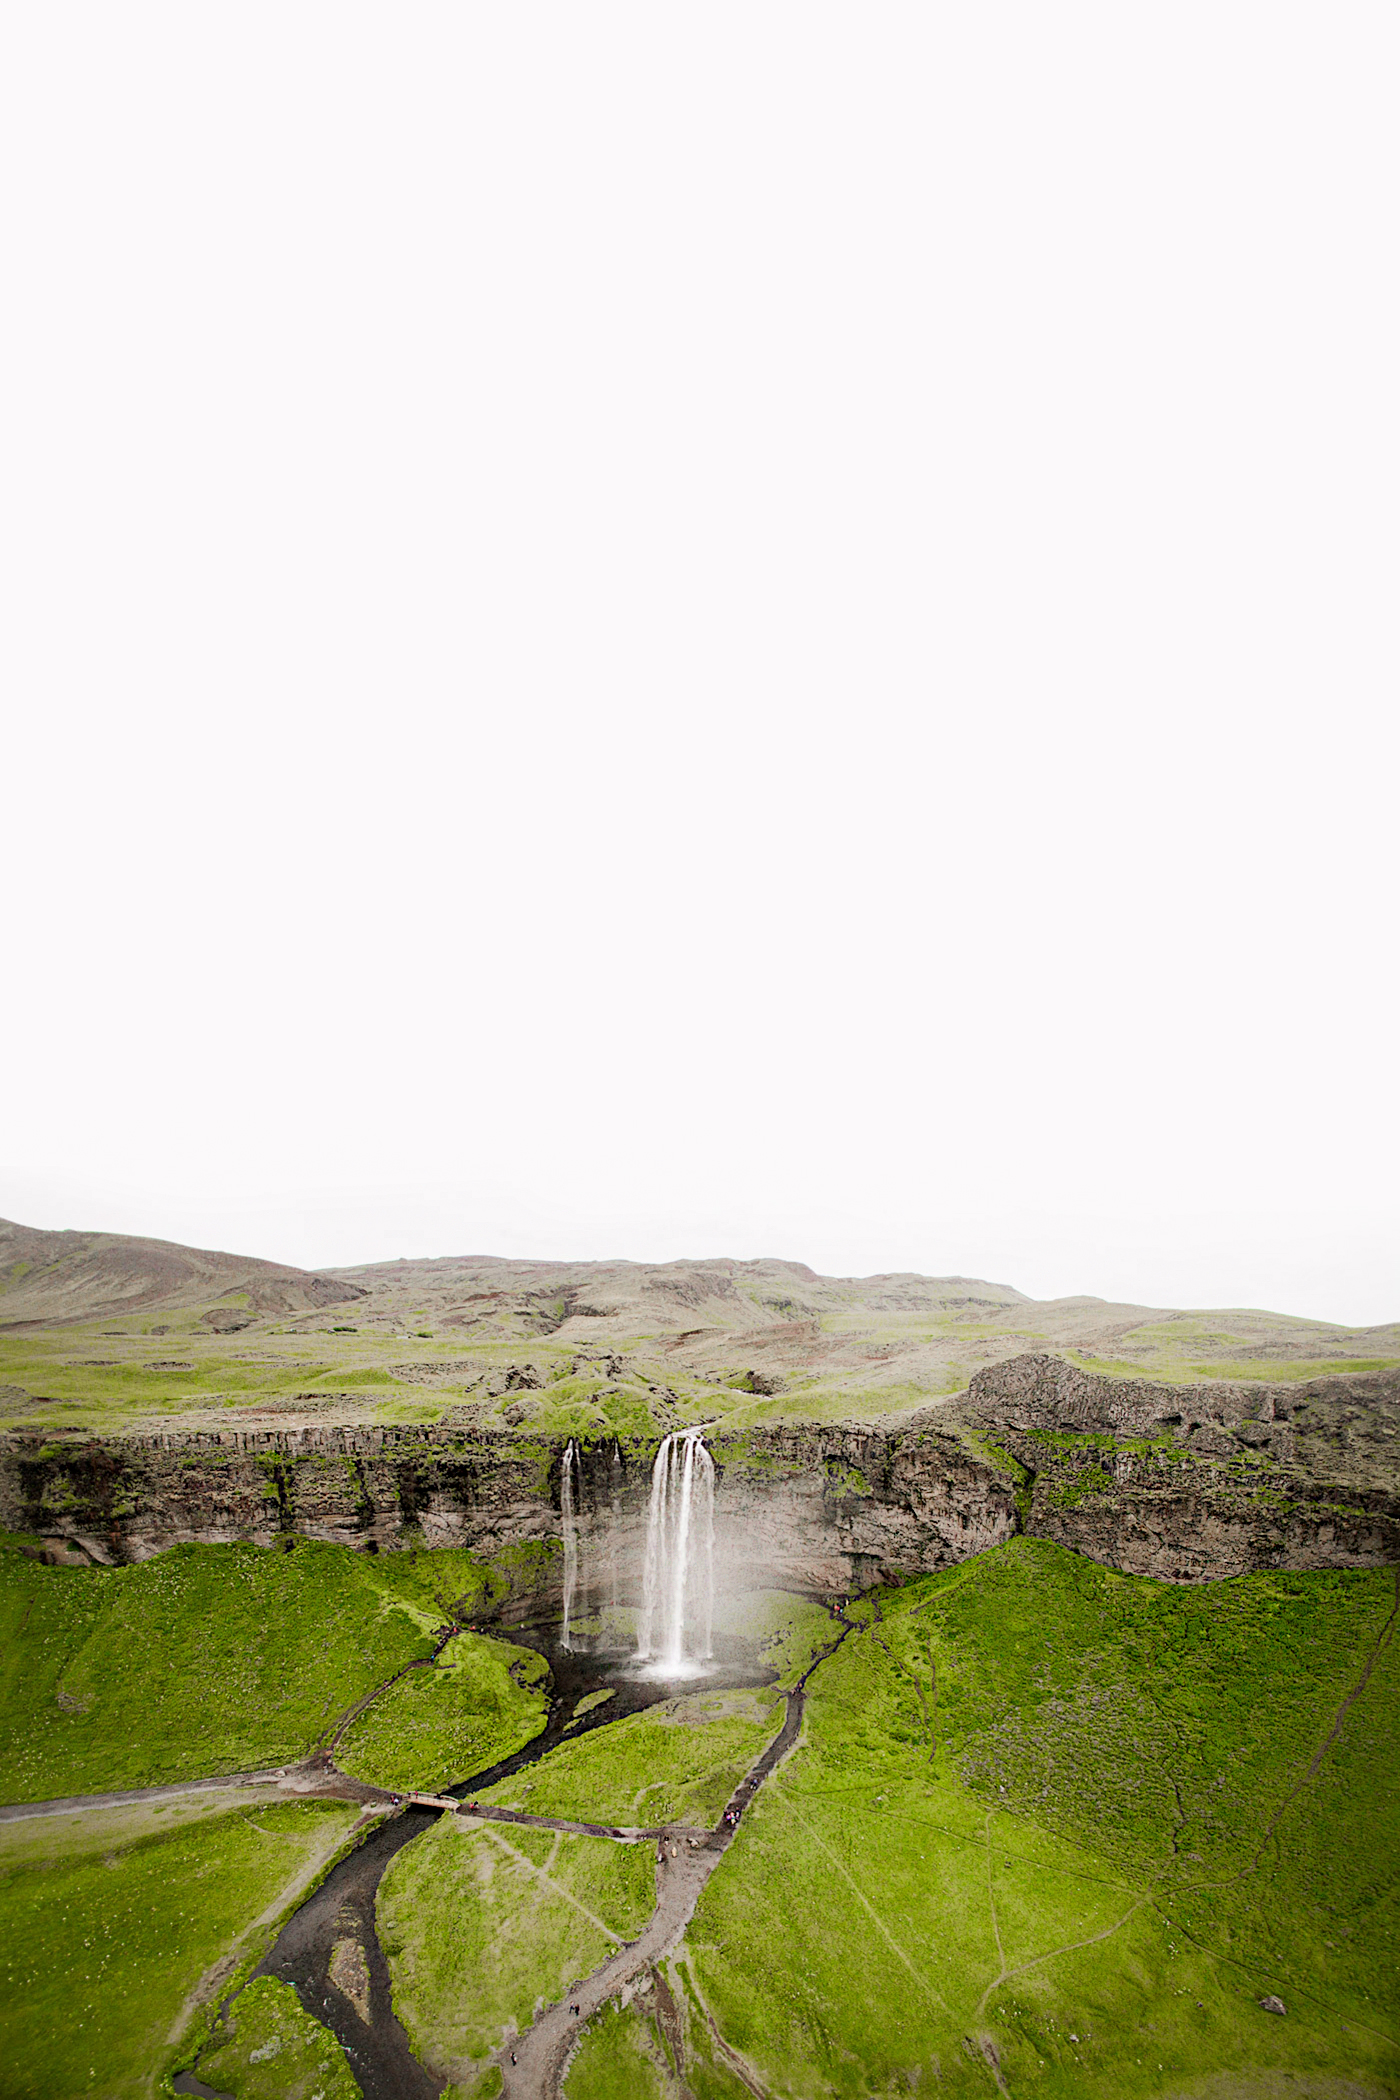 Seljalandsfoss Waterfall in Iceland. Has a trail that leads behind the waterfall!